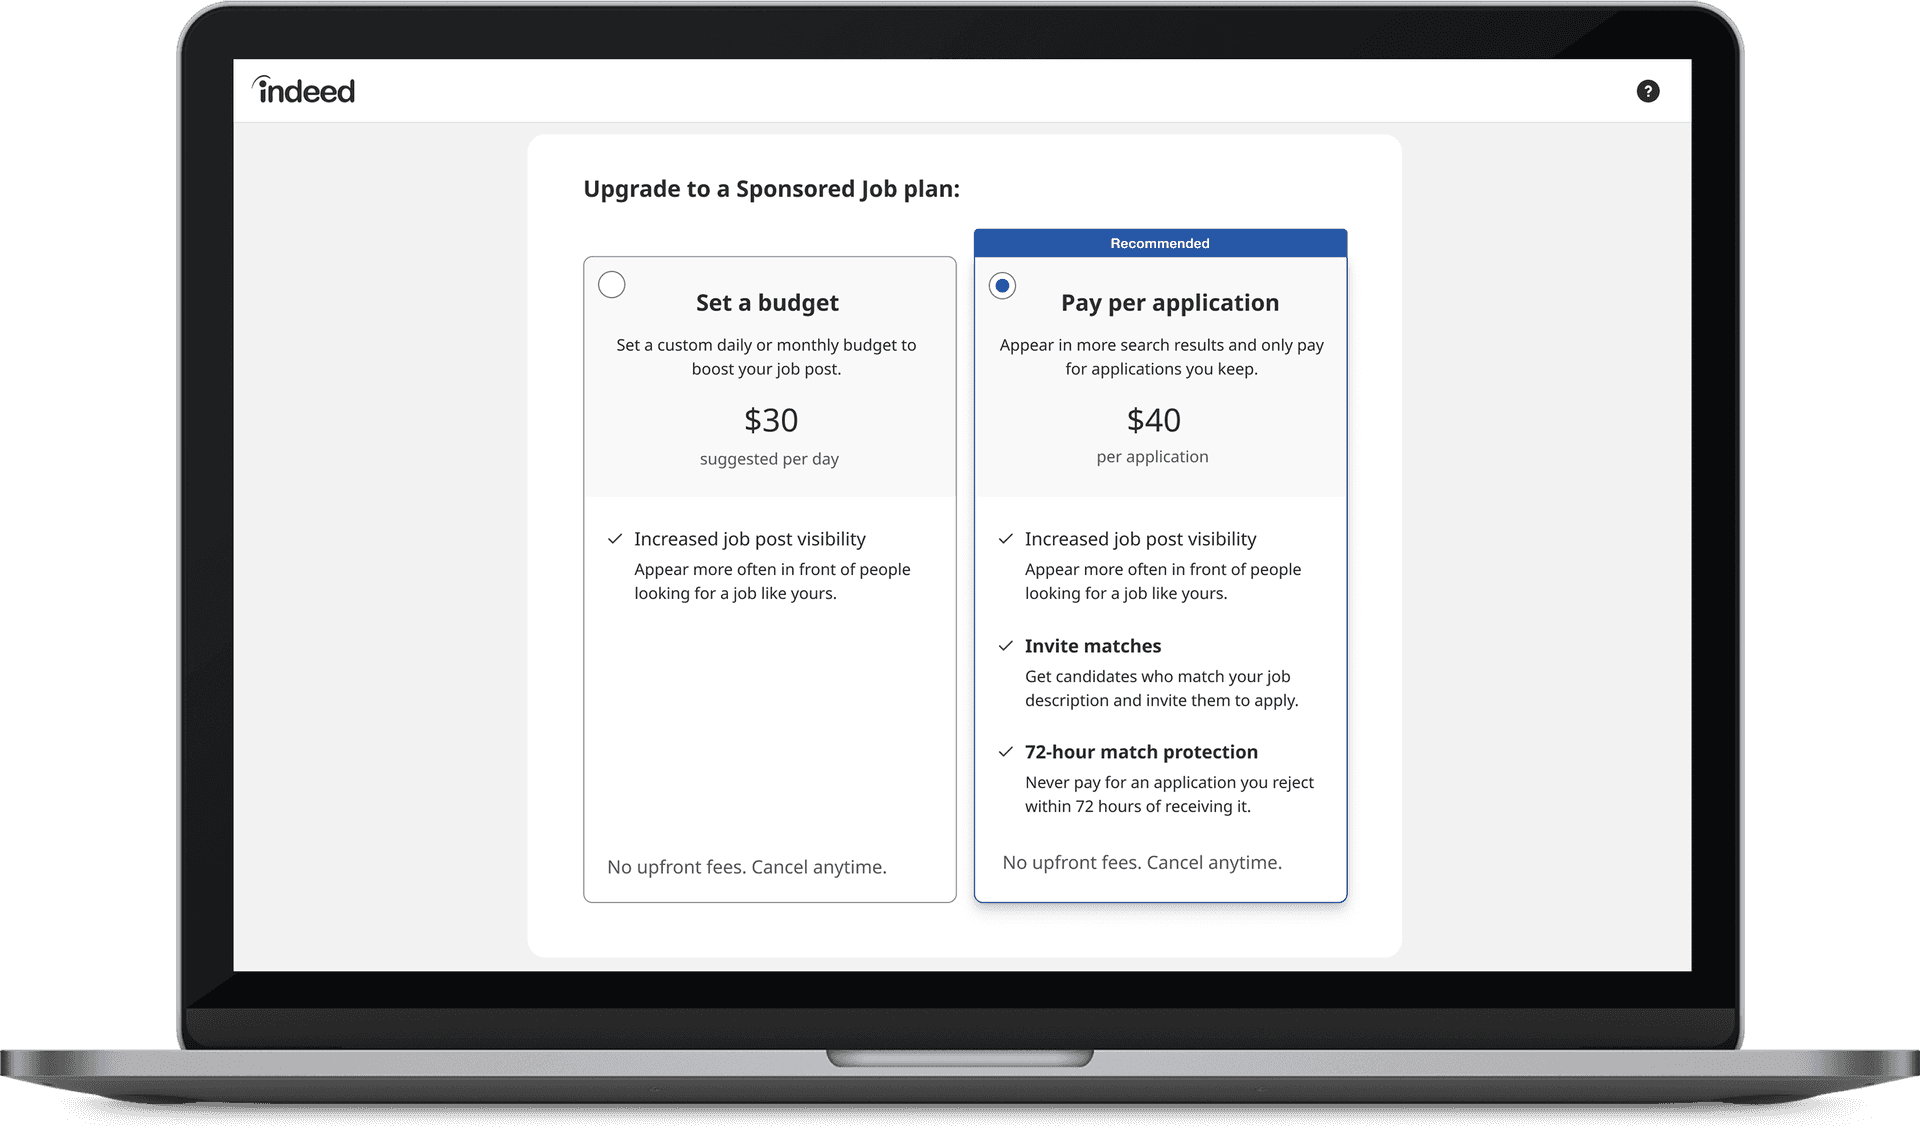 Pricing Model of Indeed Ads - Pay per Application